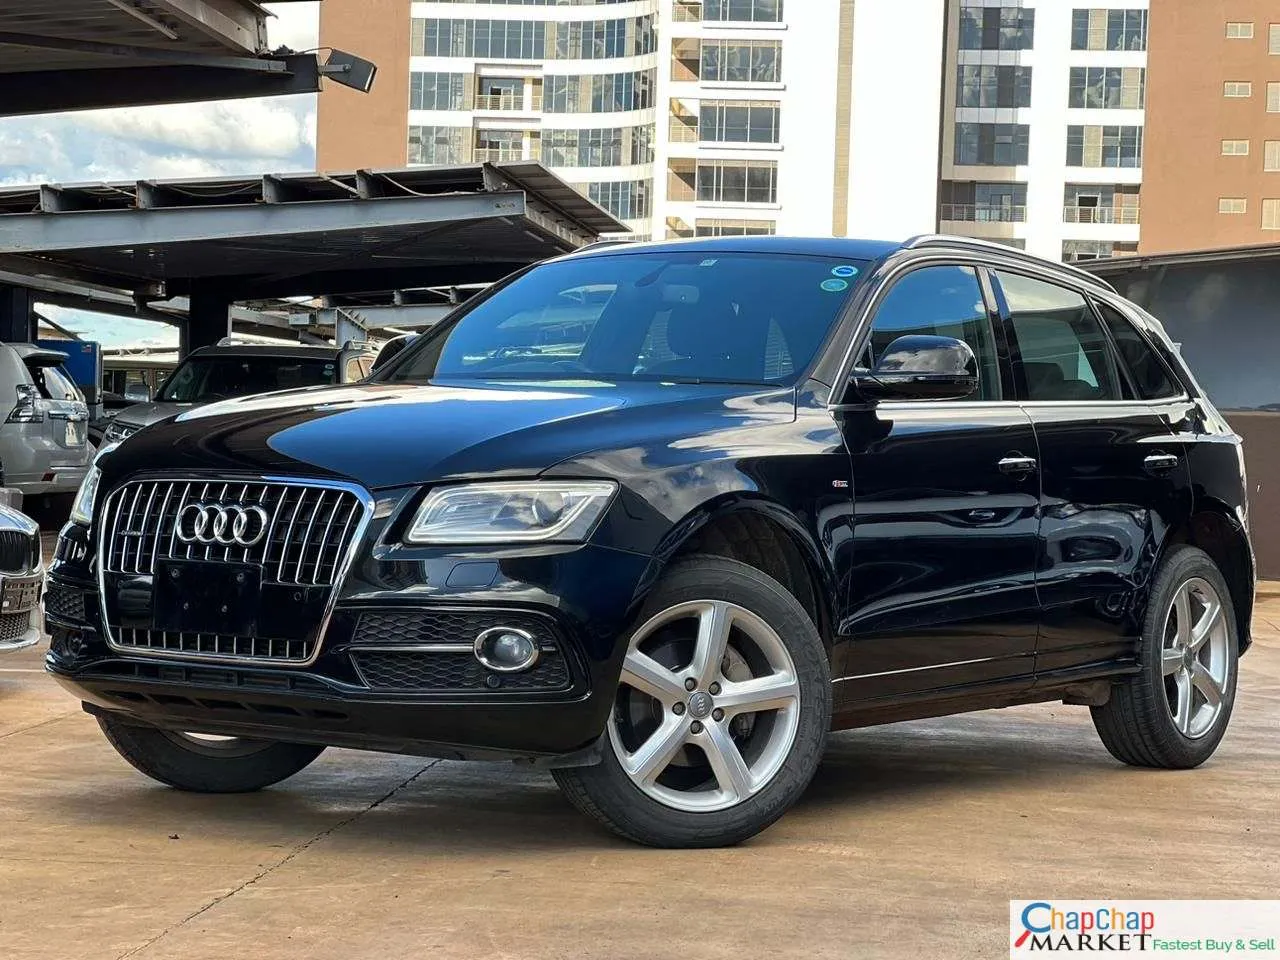 AUDI Q5 Just arrived QUICK SALE You Pay 30% deposit Trade in Ok EXCLUSIVE AUDI Q5:for sale in kenya hire purchase installments